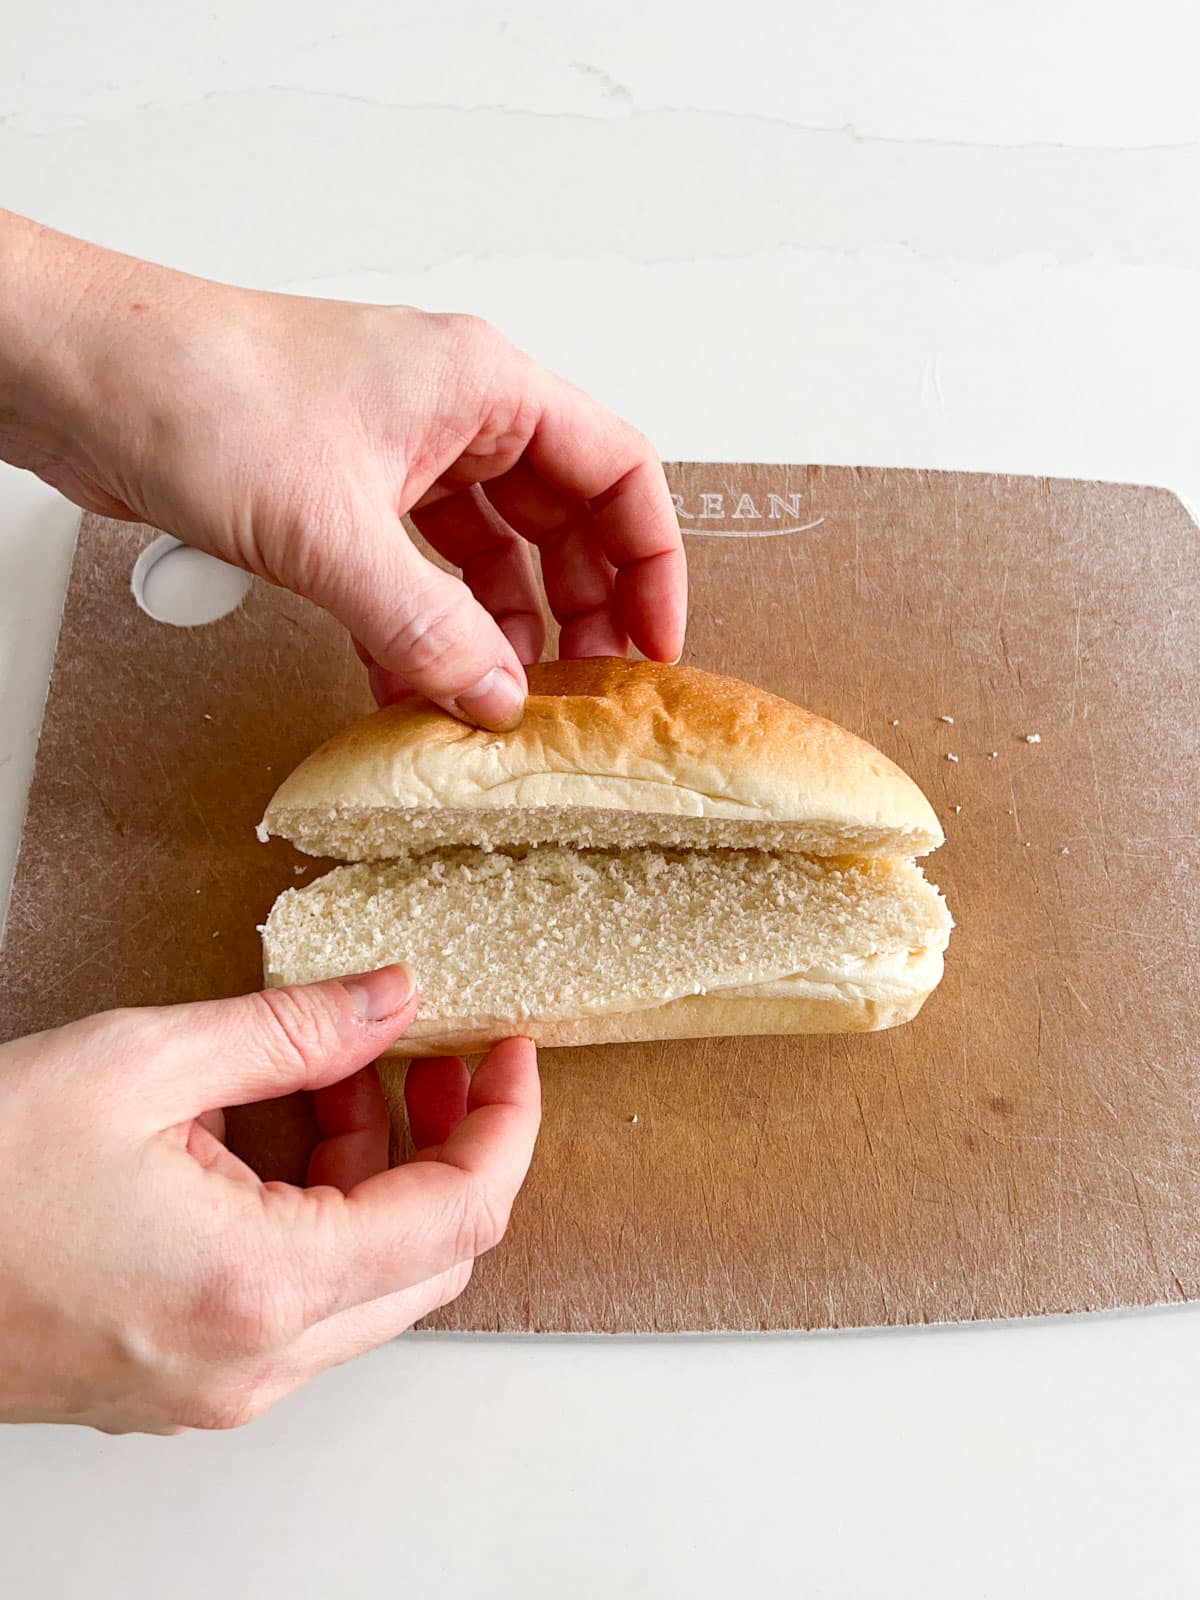 Hands holding a sub roll open on a cutting board  showing that it's still connected in the back.